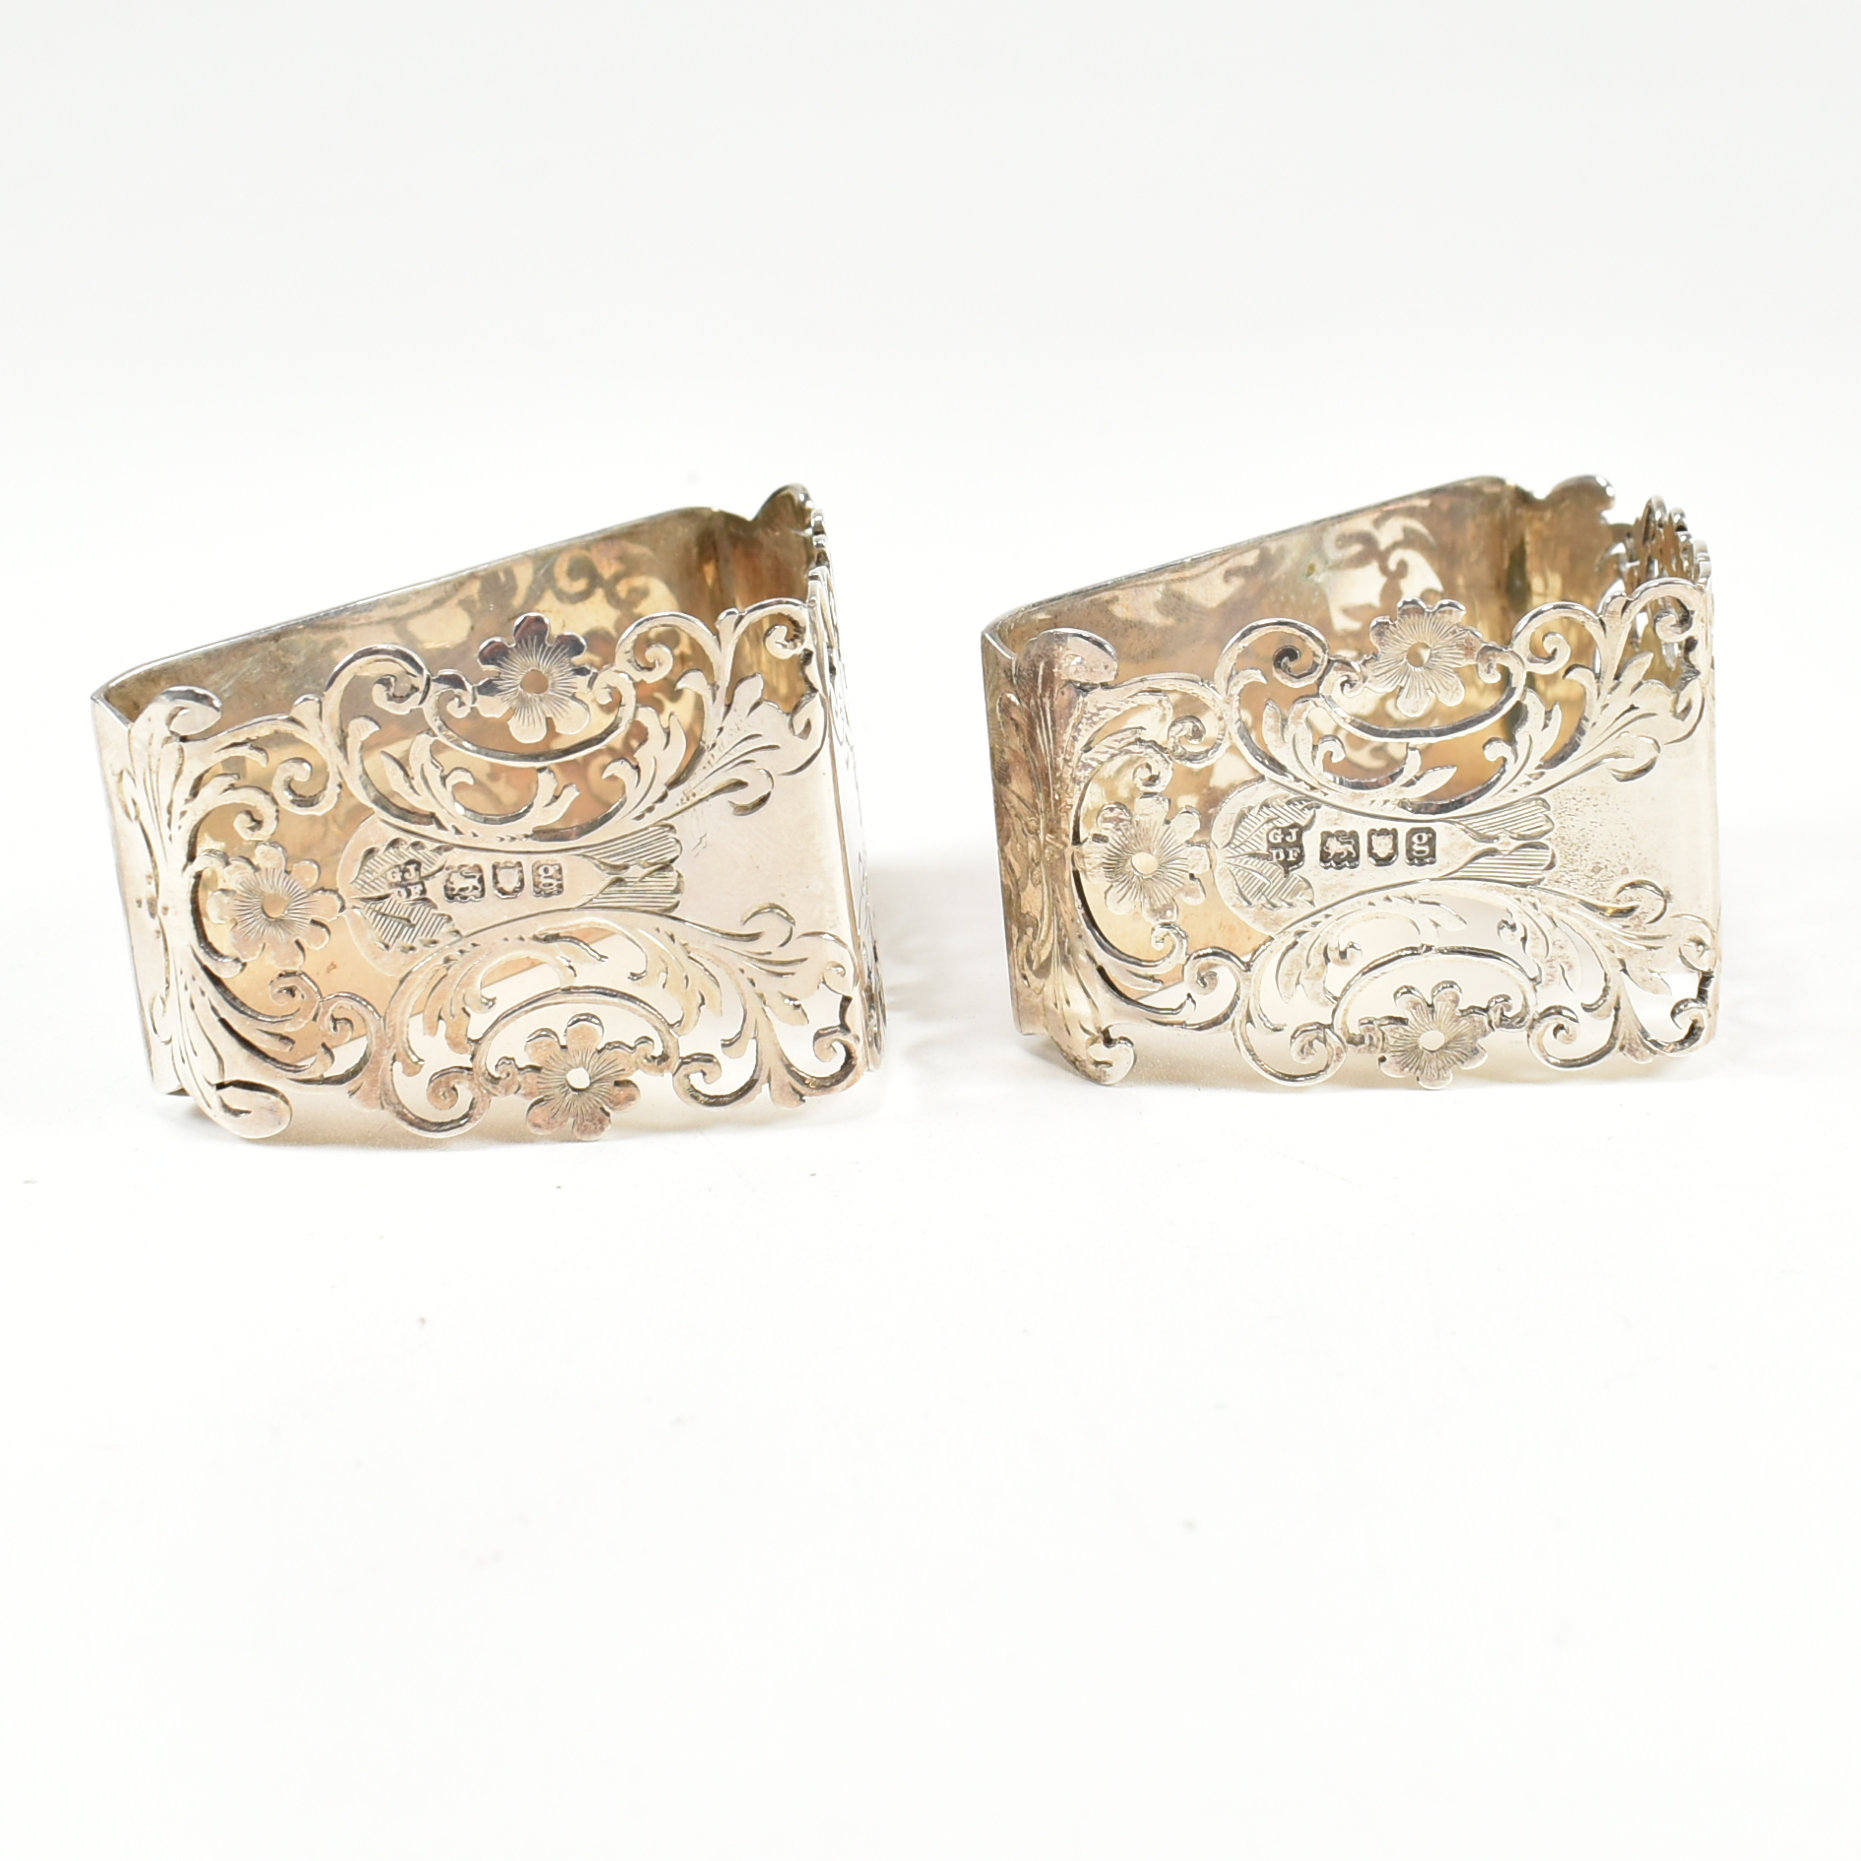 EDWARD VII CASED PAIR OF HALLMARKED SILVER NAPKIN RINGS - Image 9 of 9